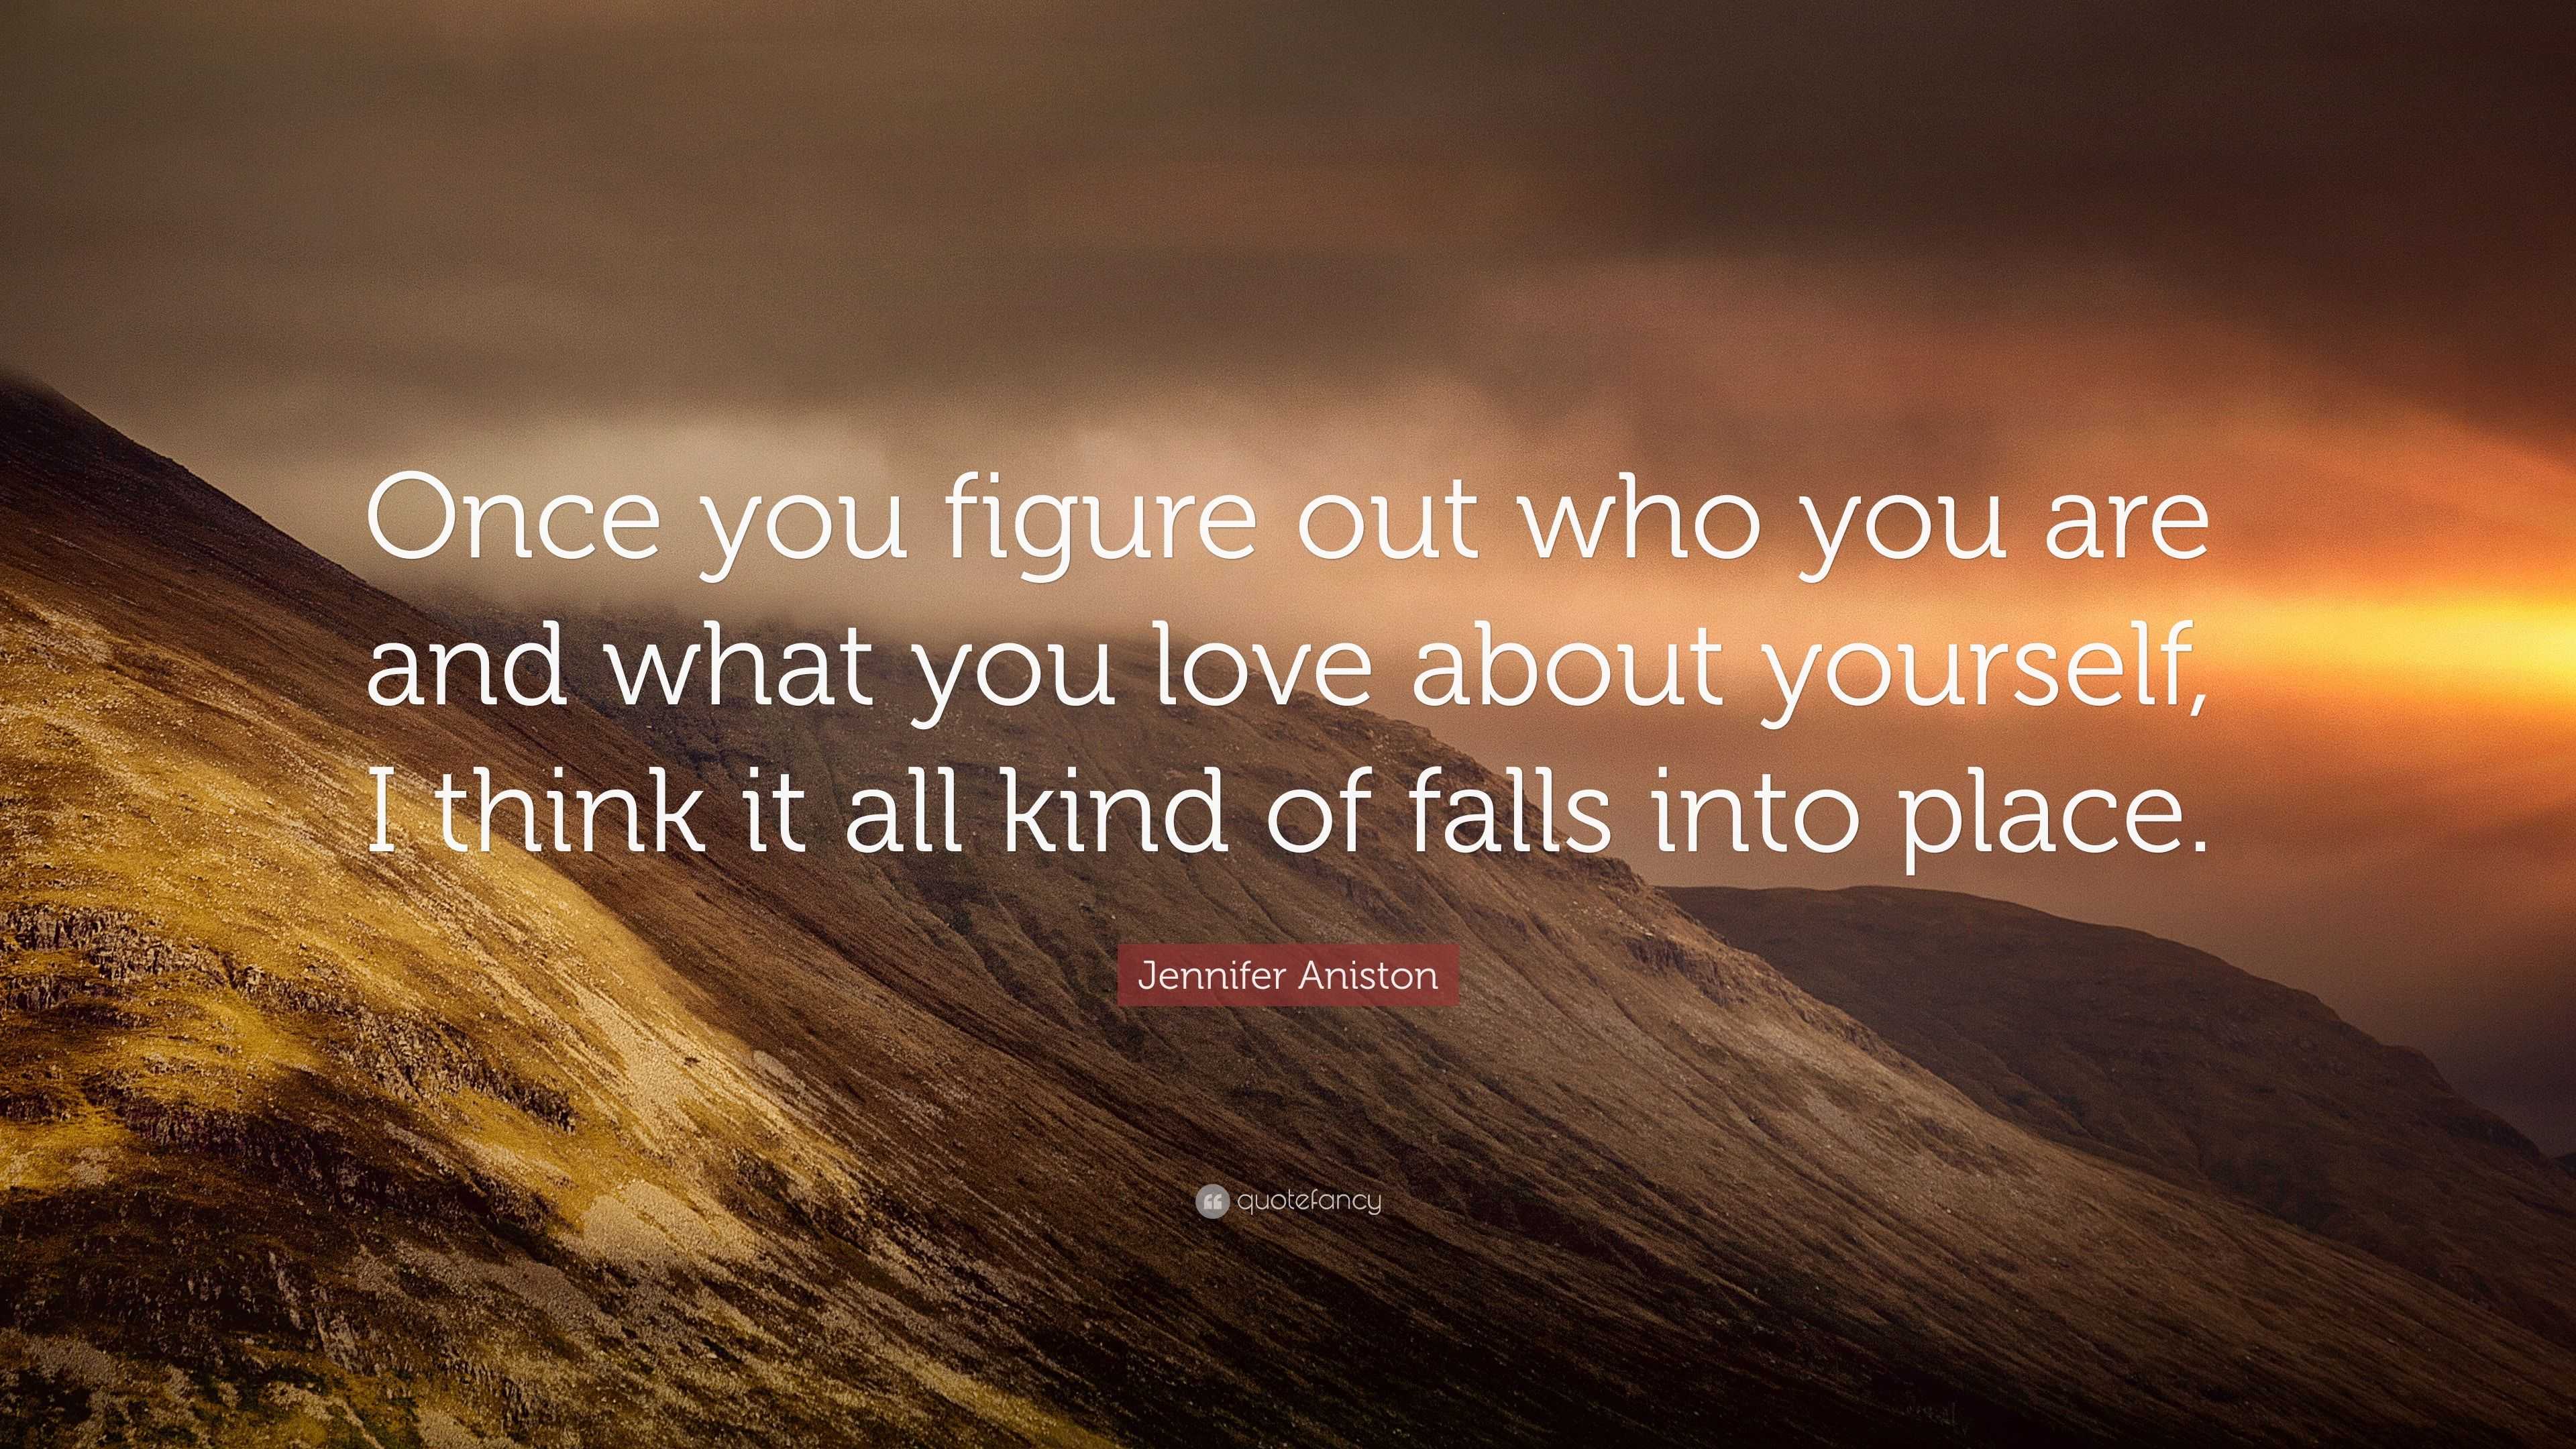 Jennifer Aniston Quote: “Once you figure out who you are and what you ...